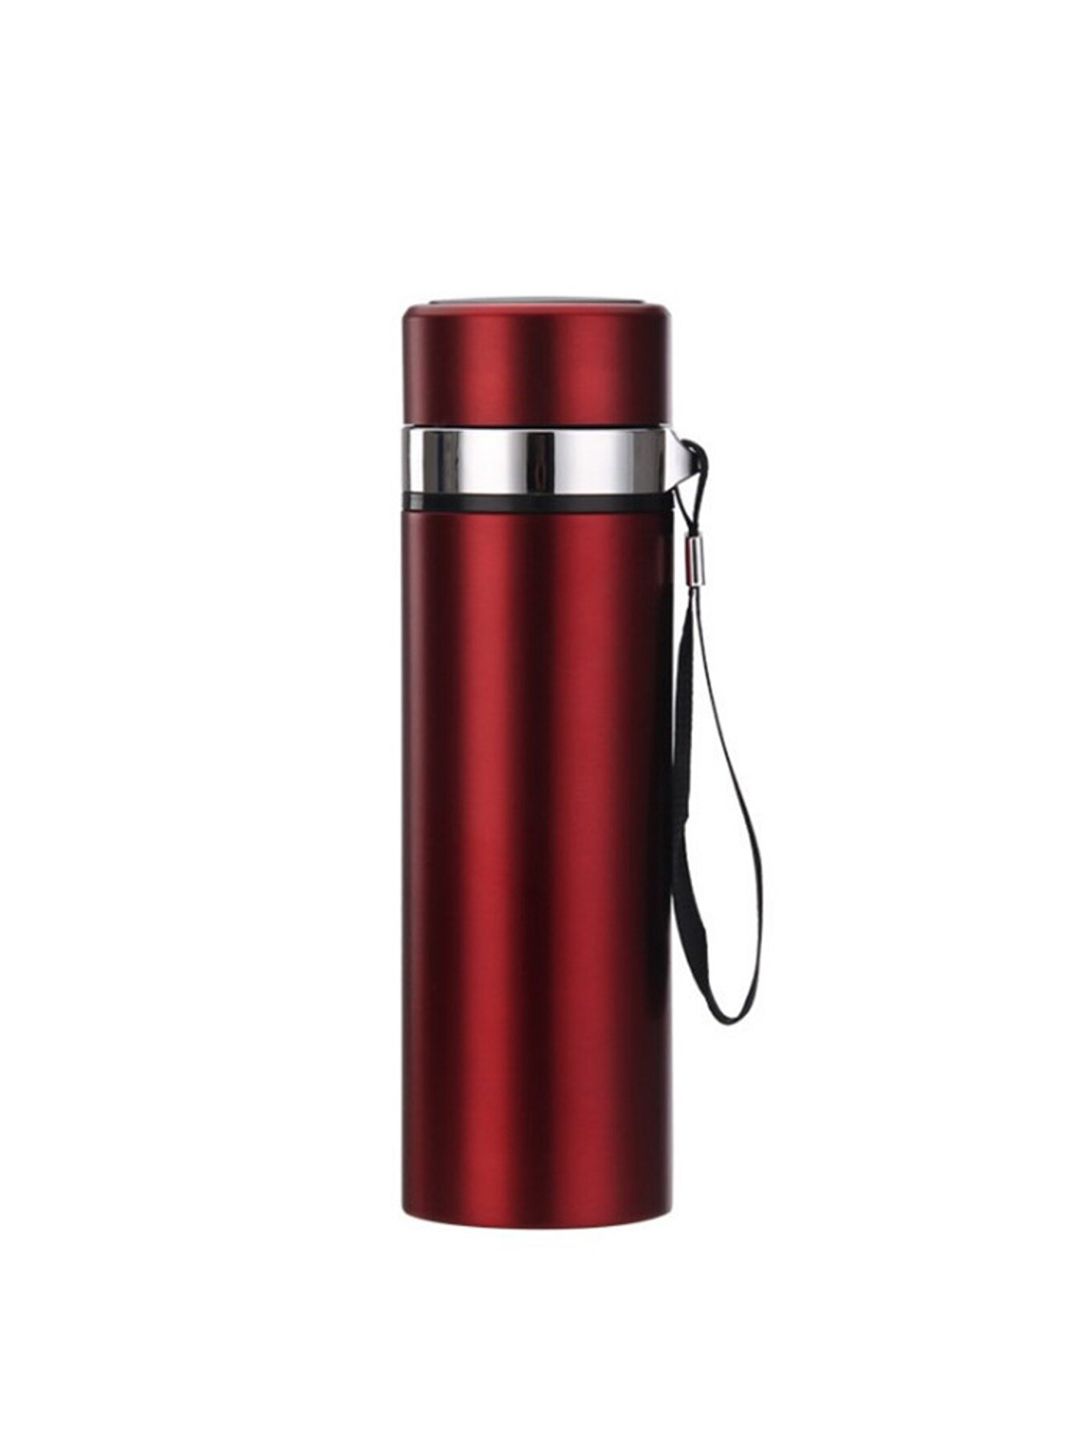 iSWEVEN Red Solid Stainless Steel Water Bottle 650 ml Price in India